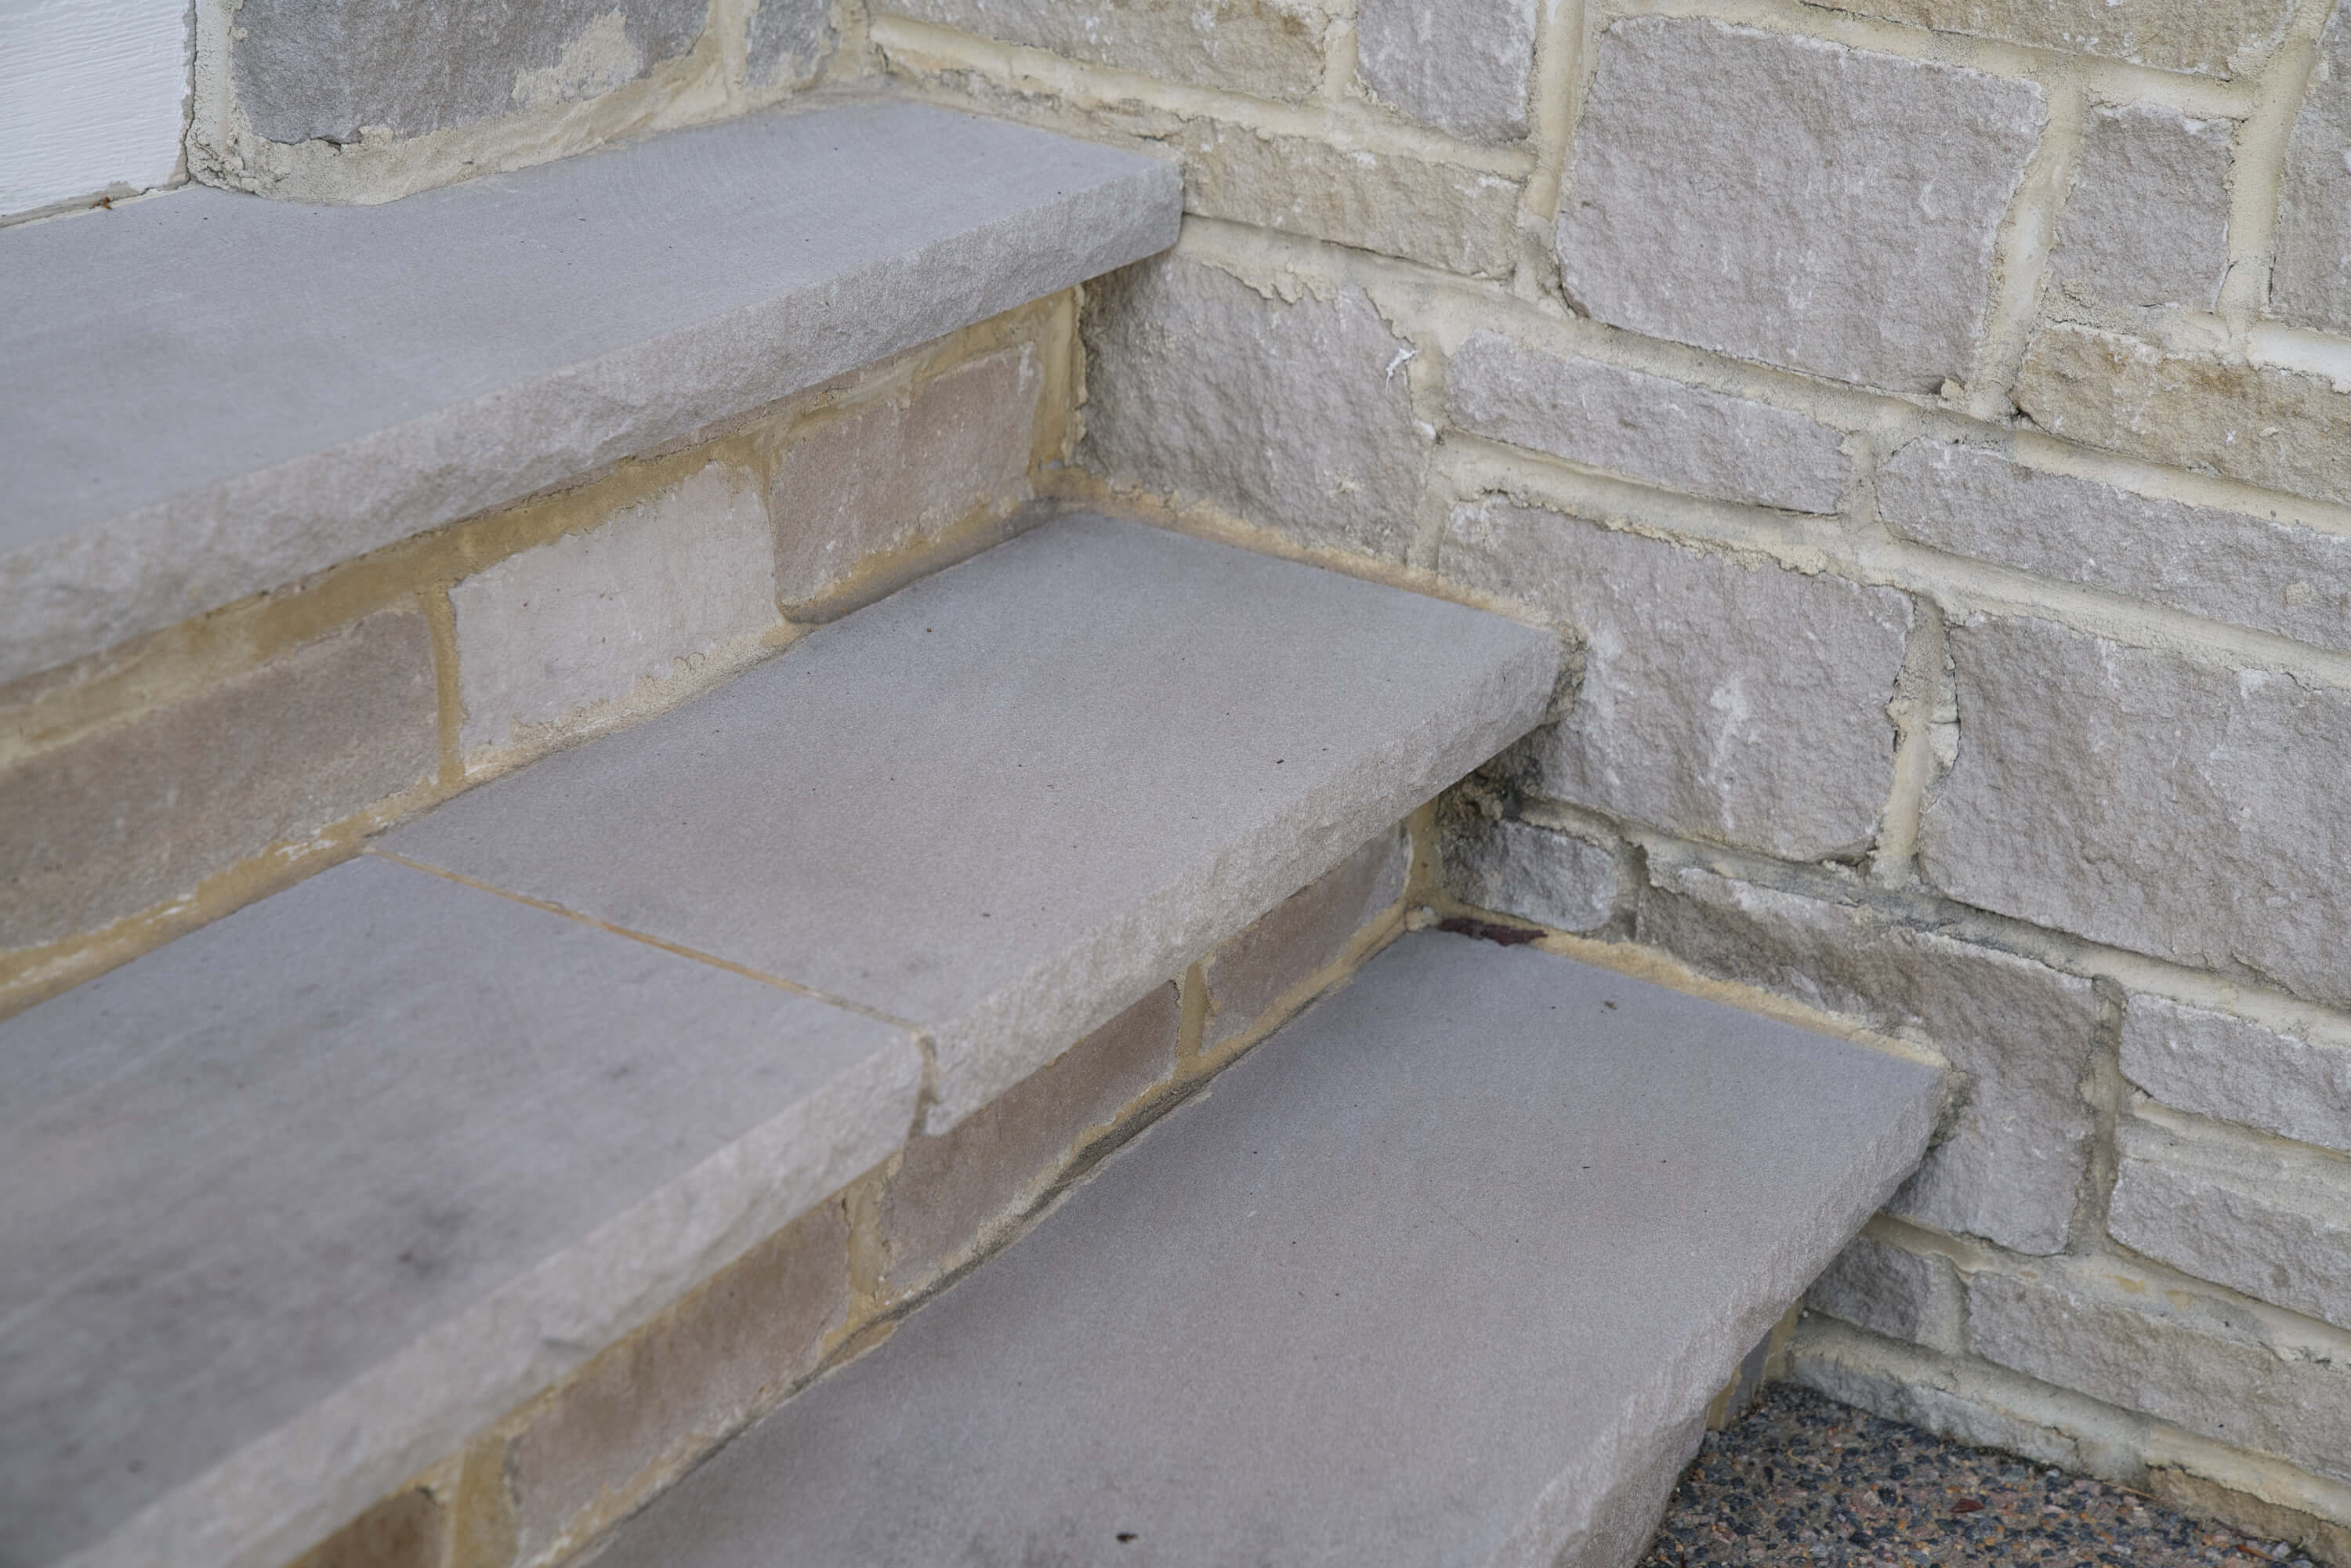 Steps And Treads Swenson American Granite Products